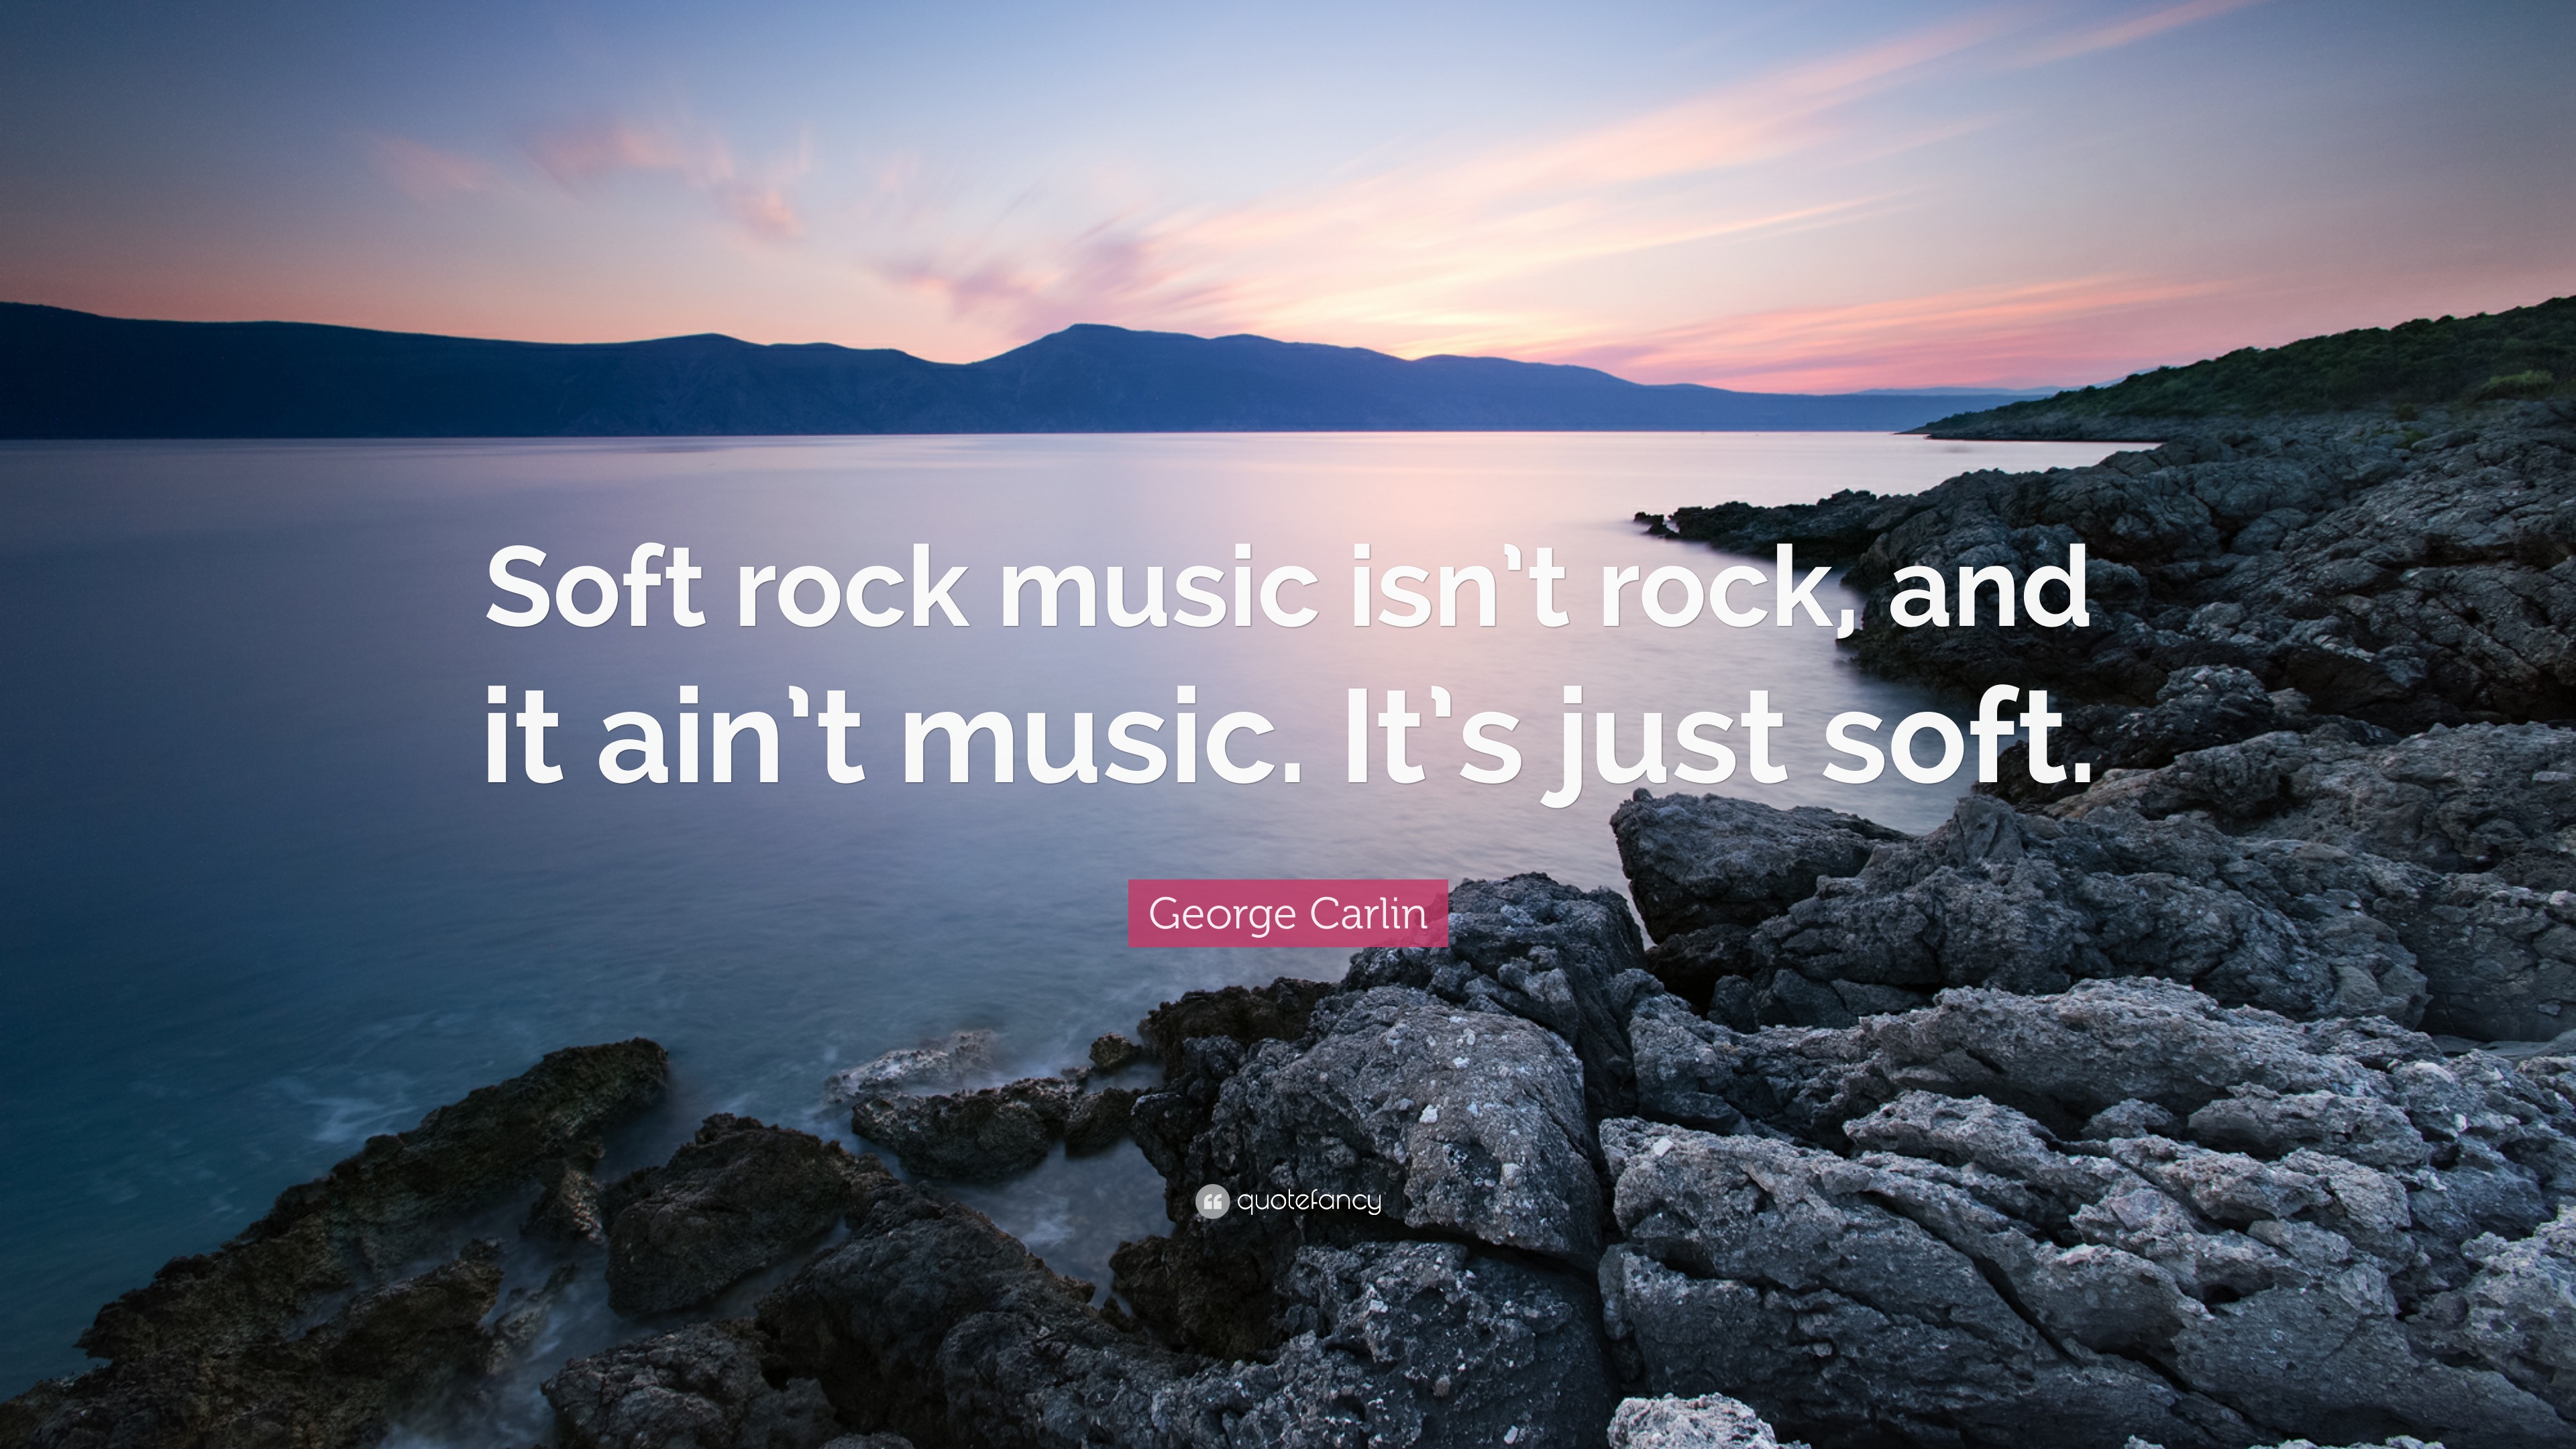 George Carlin Quote: “Soft rock music isn't rock, and it ain't